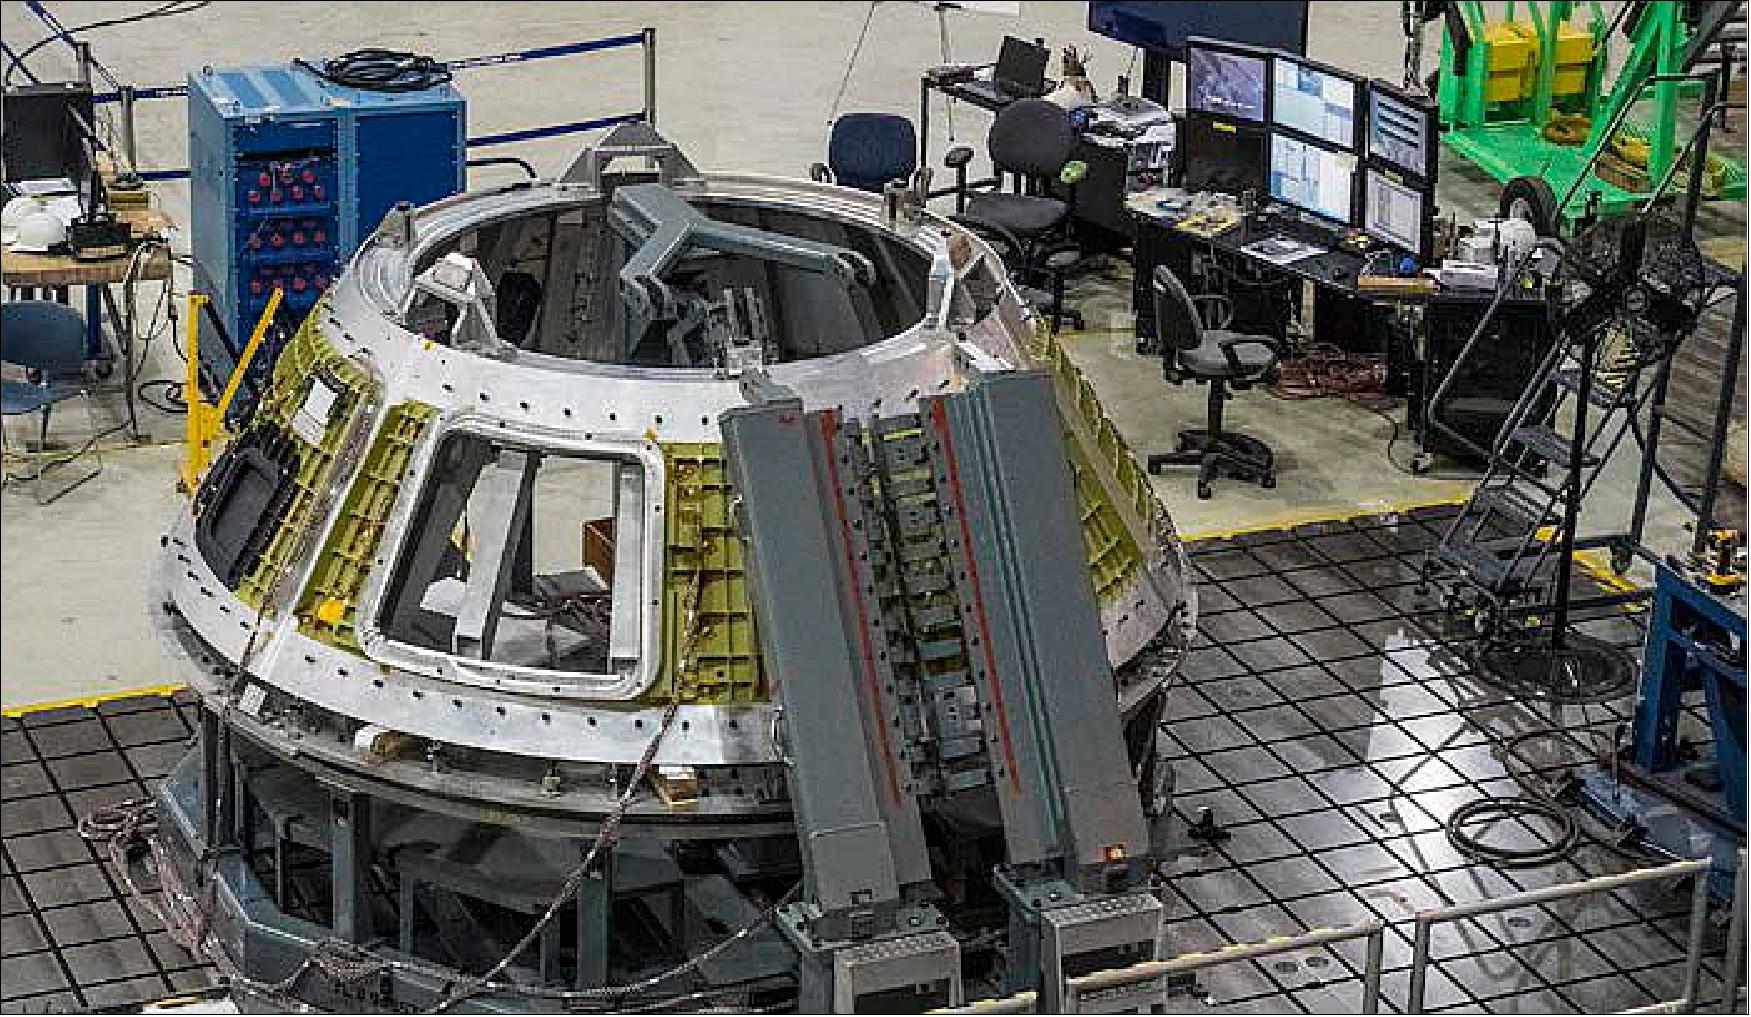 Figure 14: Technicians with Lockheed Martin, NASA’s prime contractor for Orion, are welding together the pieces of the spacecraft's pressure vessel at Michoud Assembly Center in New Orleans, LA (image credit: NASA)